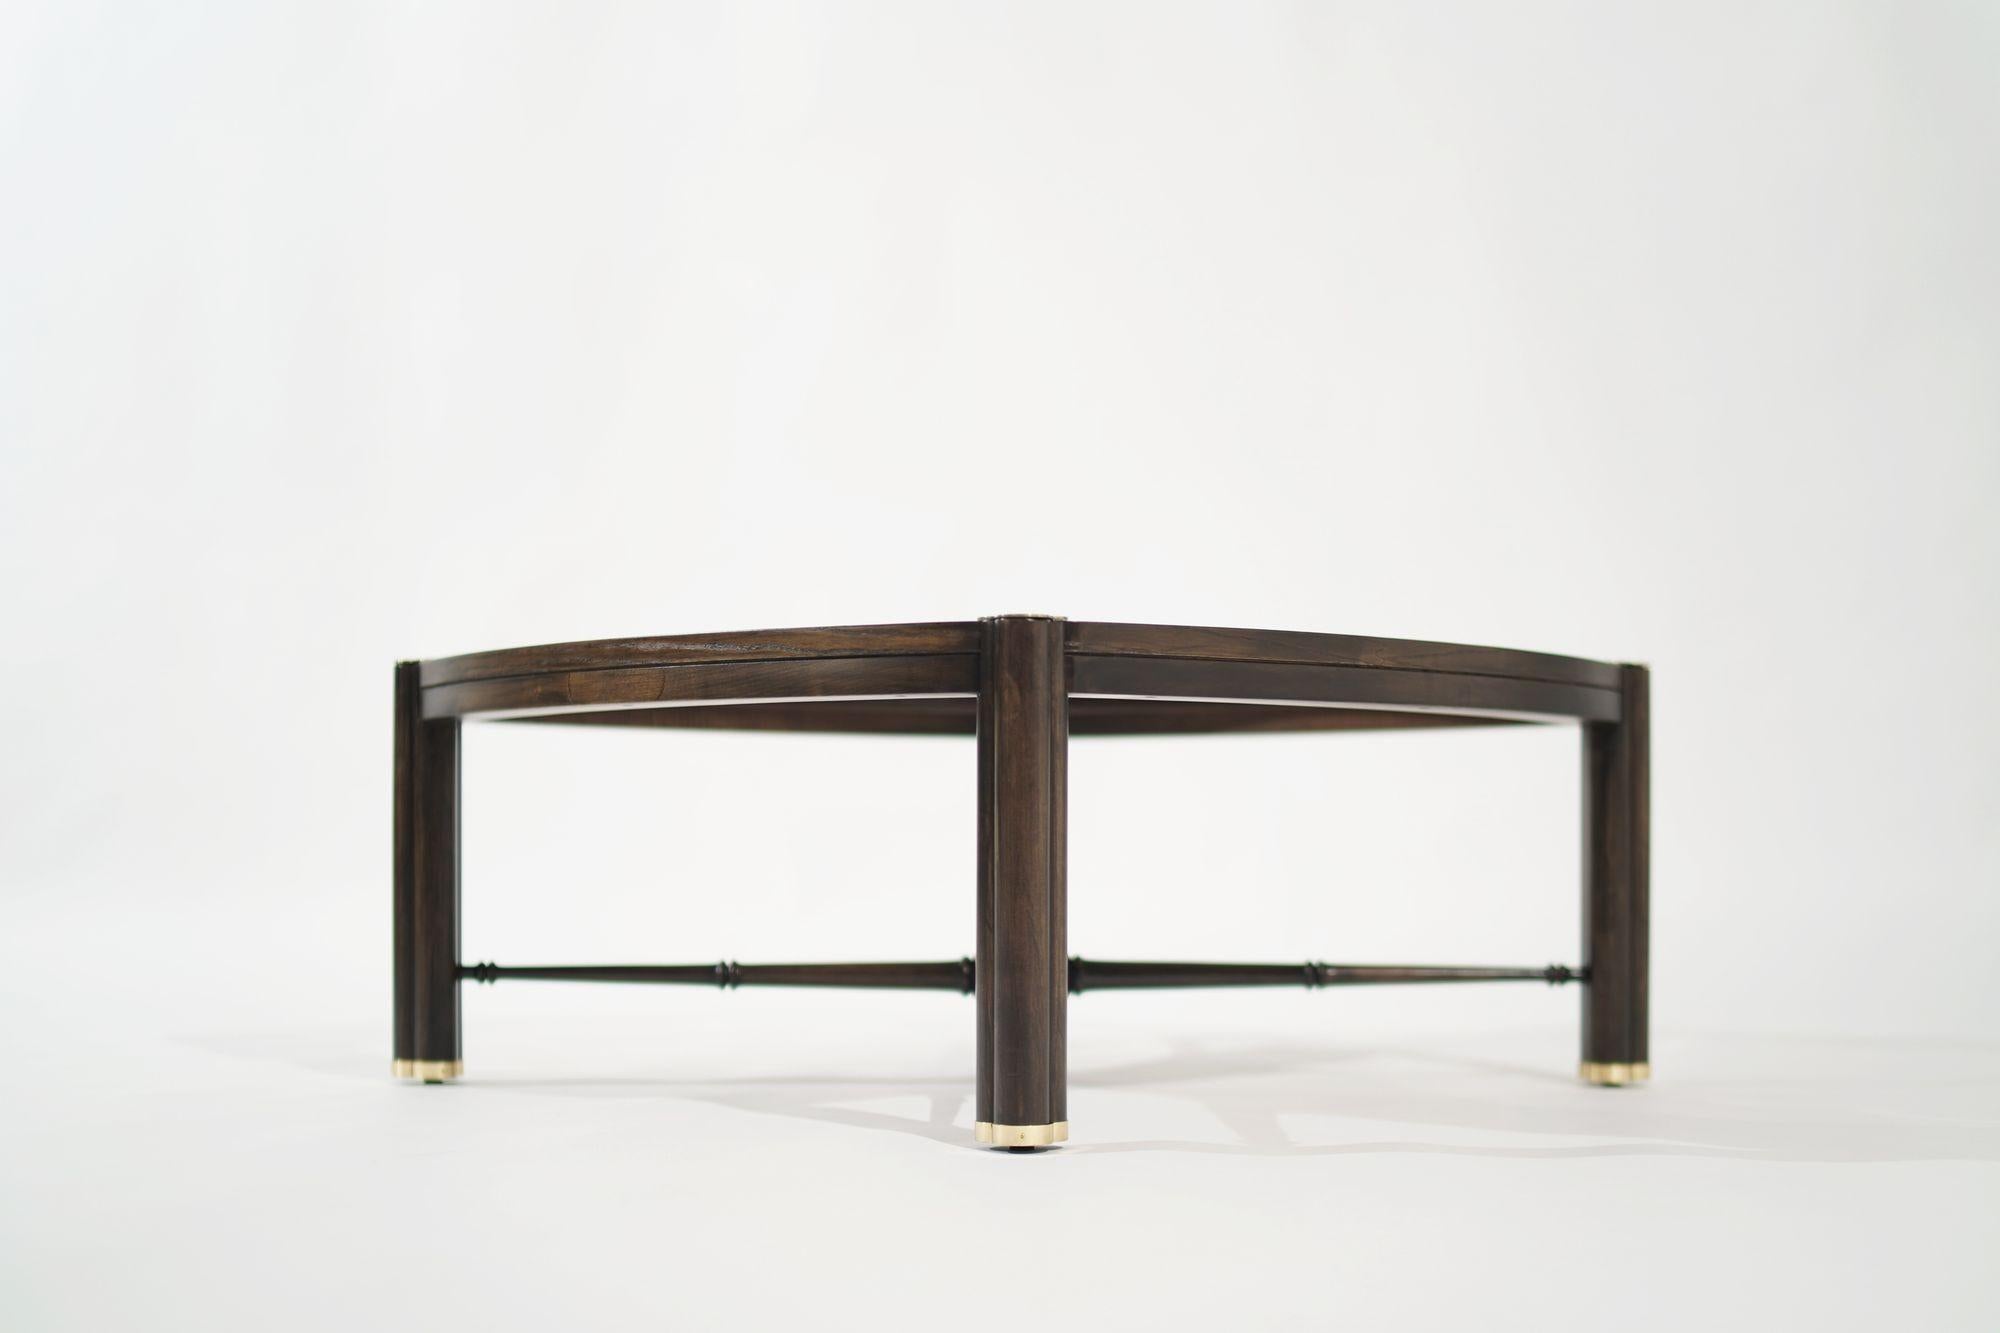 American Walnut Burl Wood Coffee Table with Brass Accents, C. 1960s